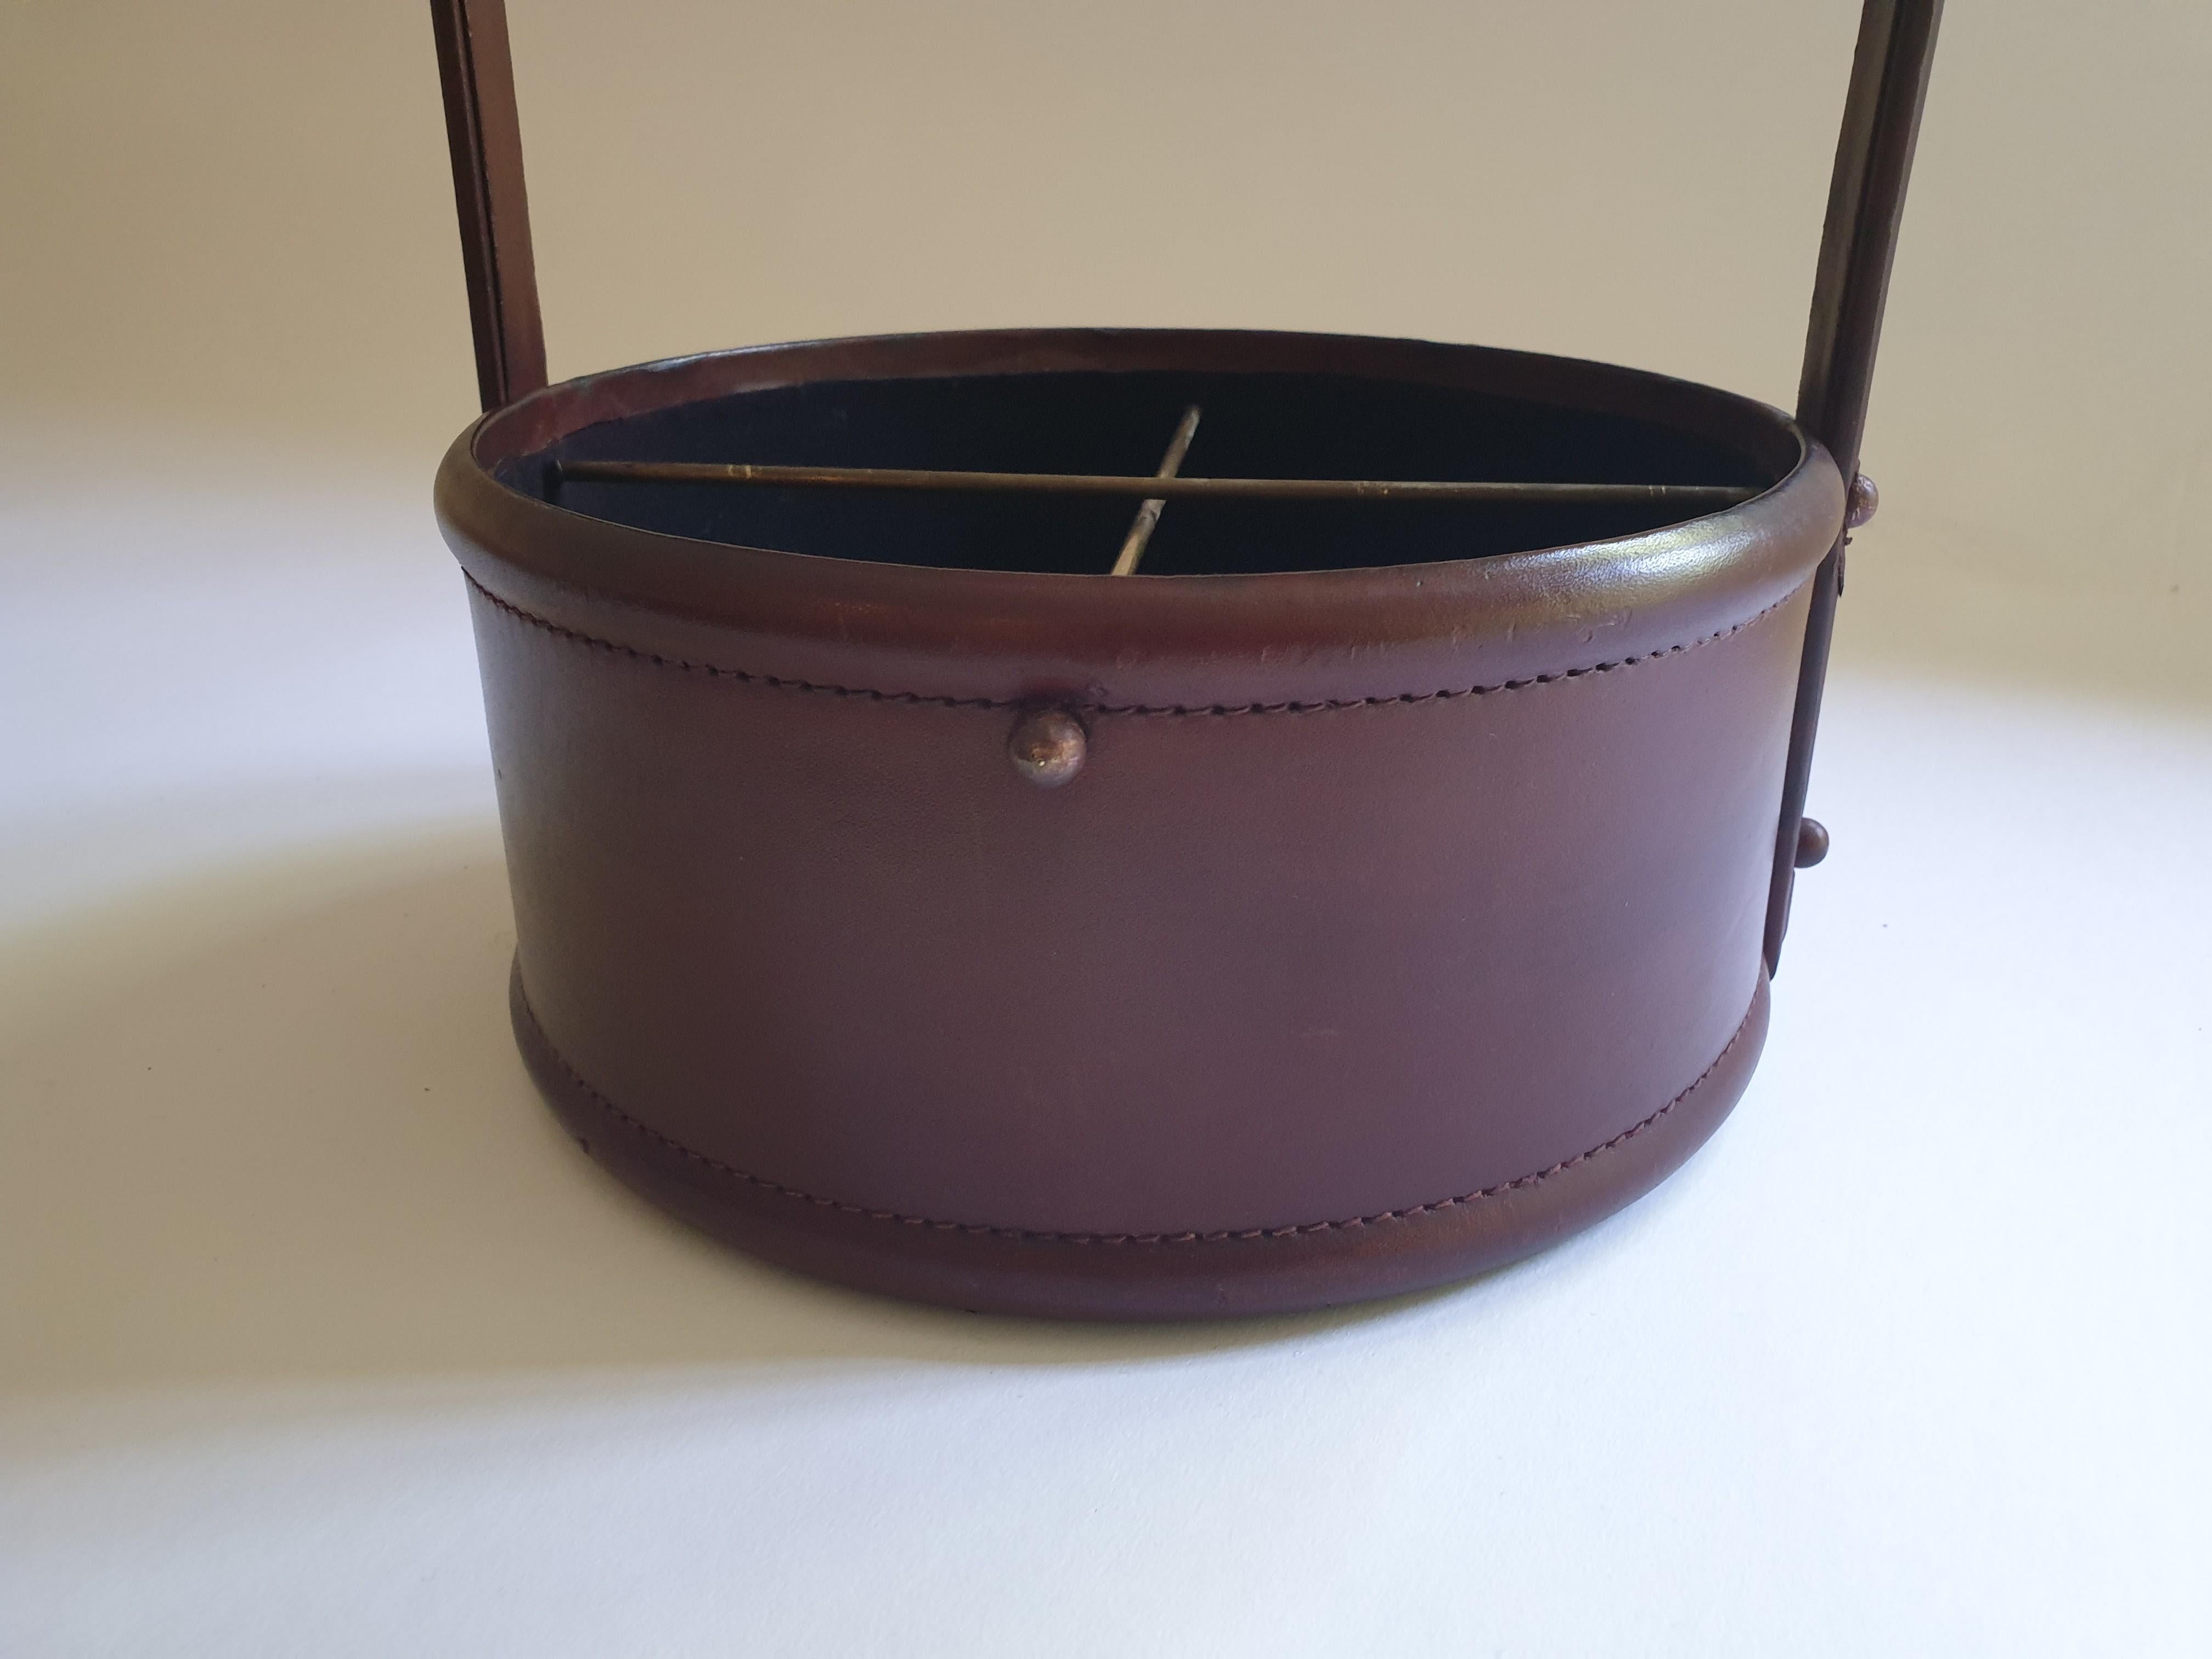 Dark red leather and brass leather wine carrier designed to take four bottles. Please note wear to leather covering to handle.